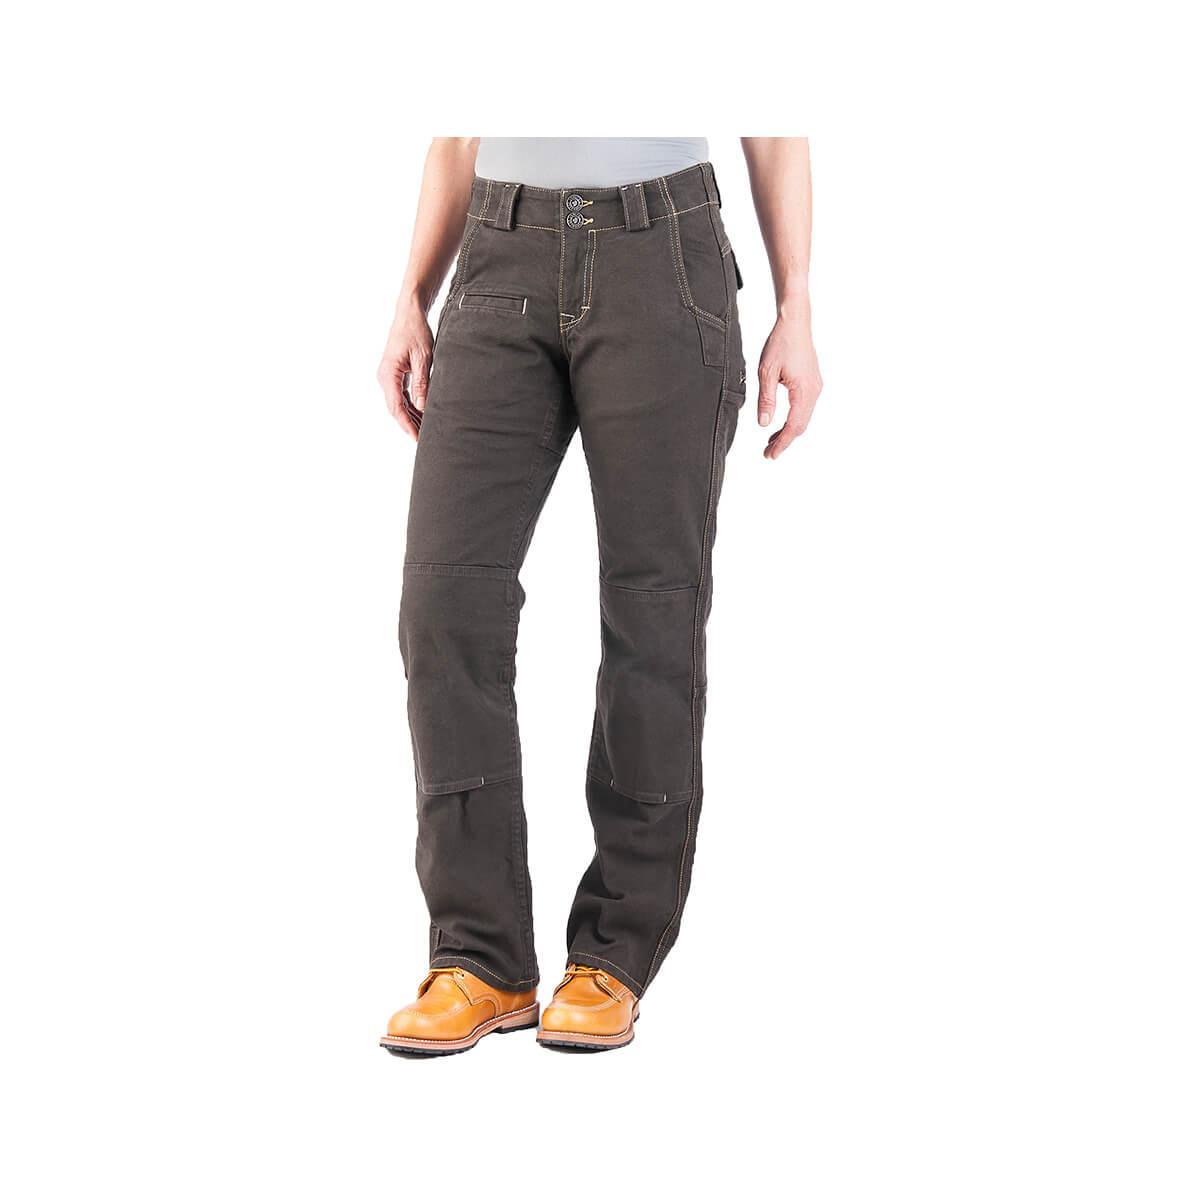  Women's Construct In Brown Stretch Canvas Pants